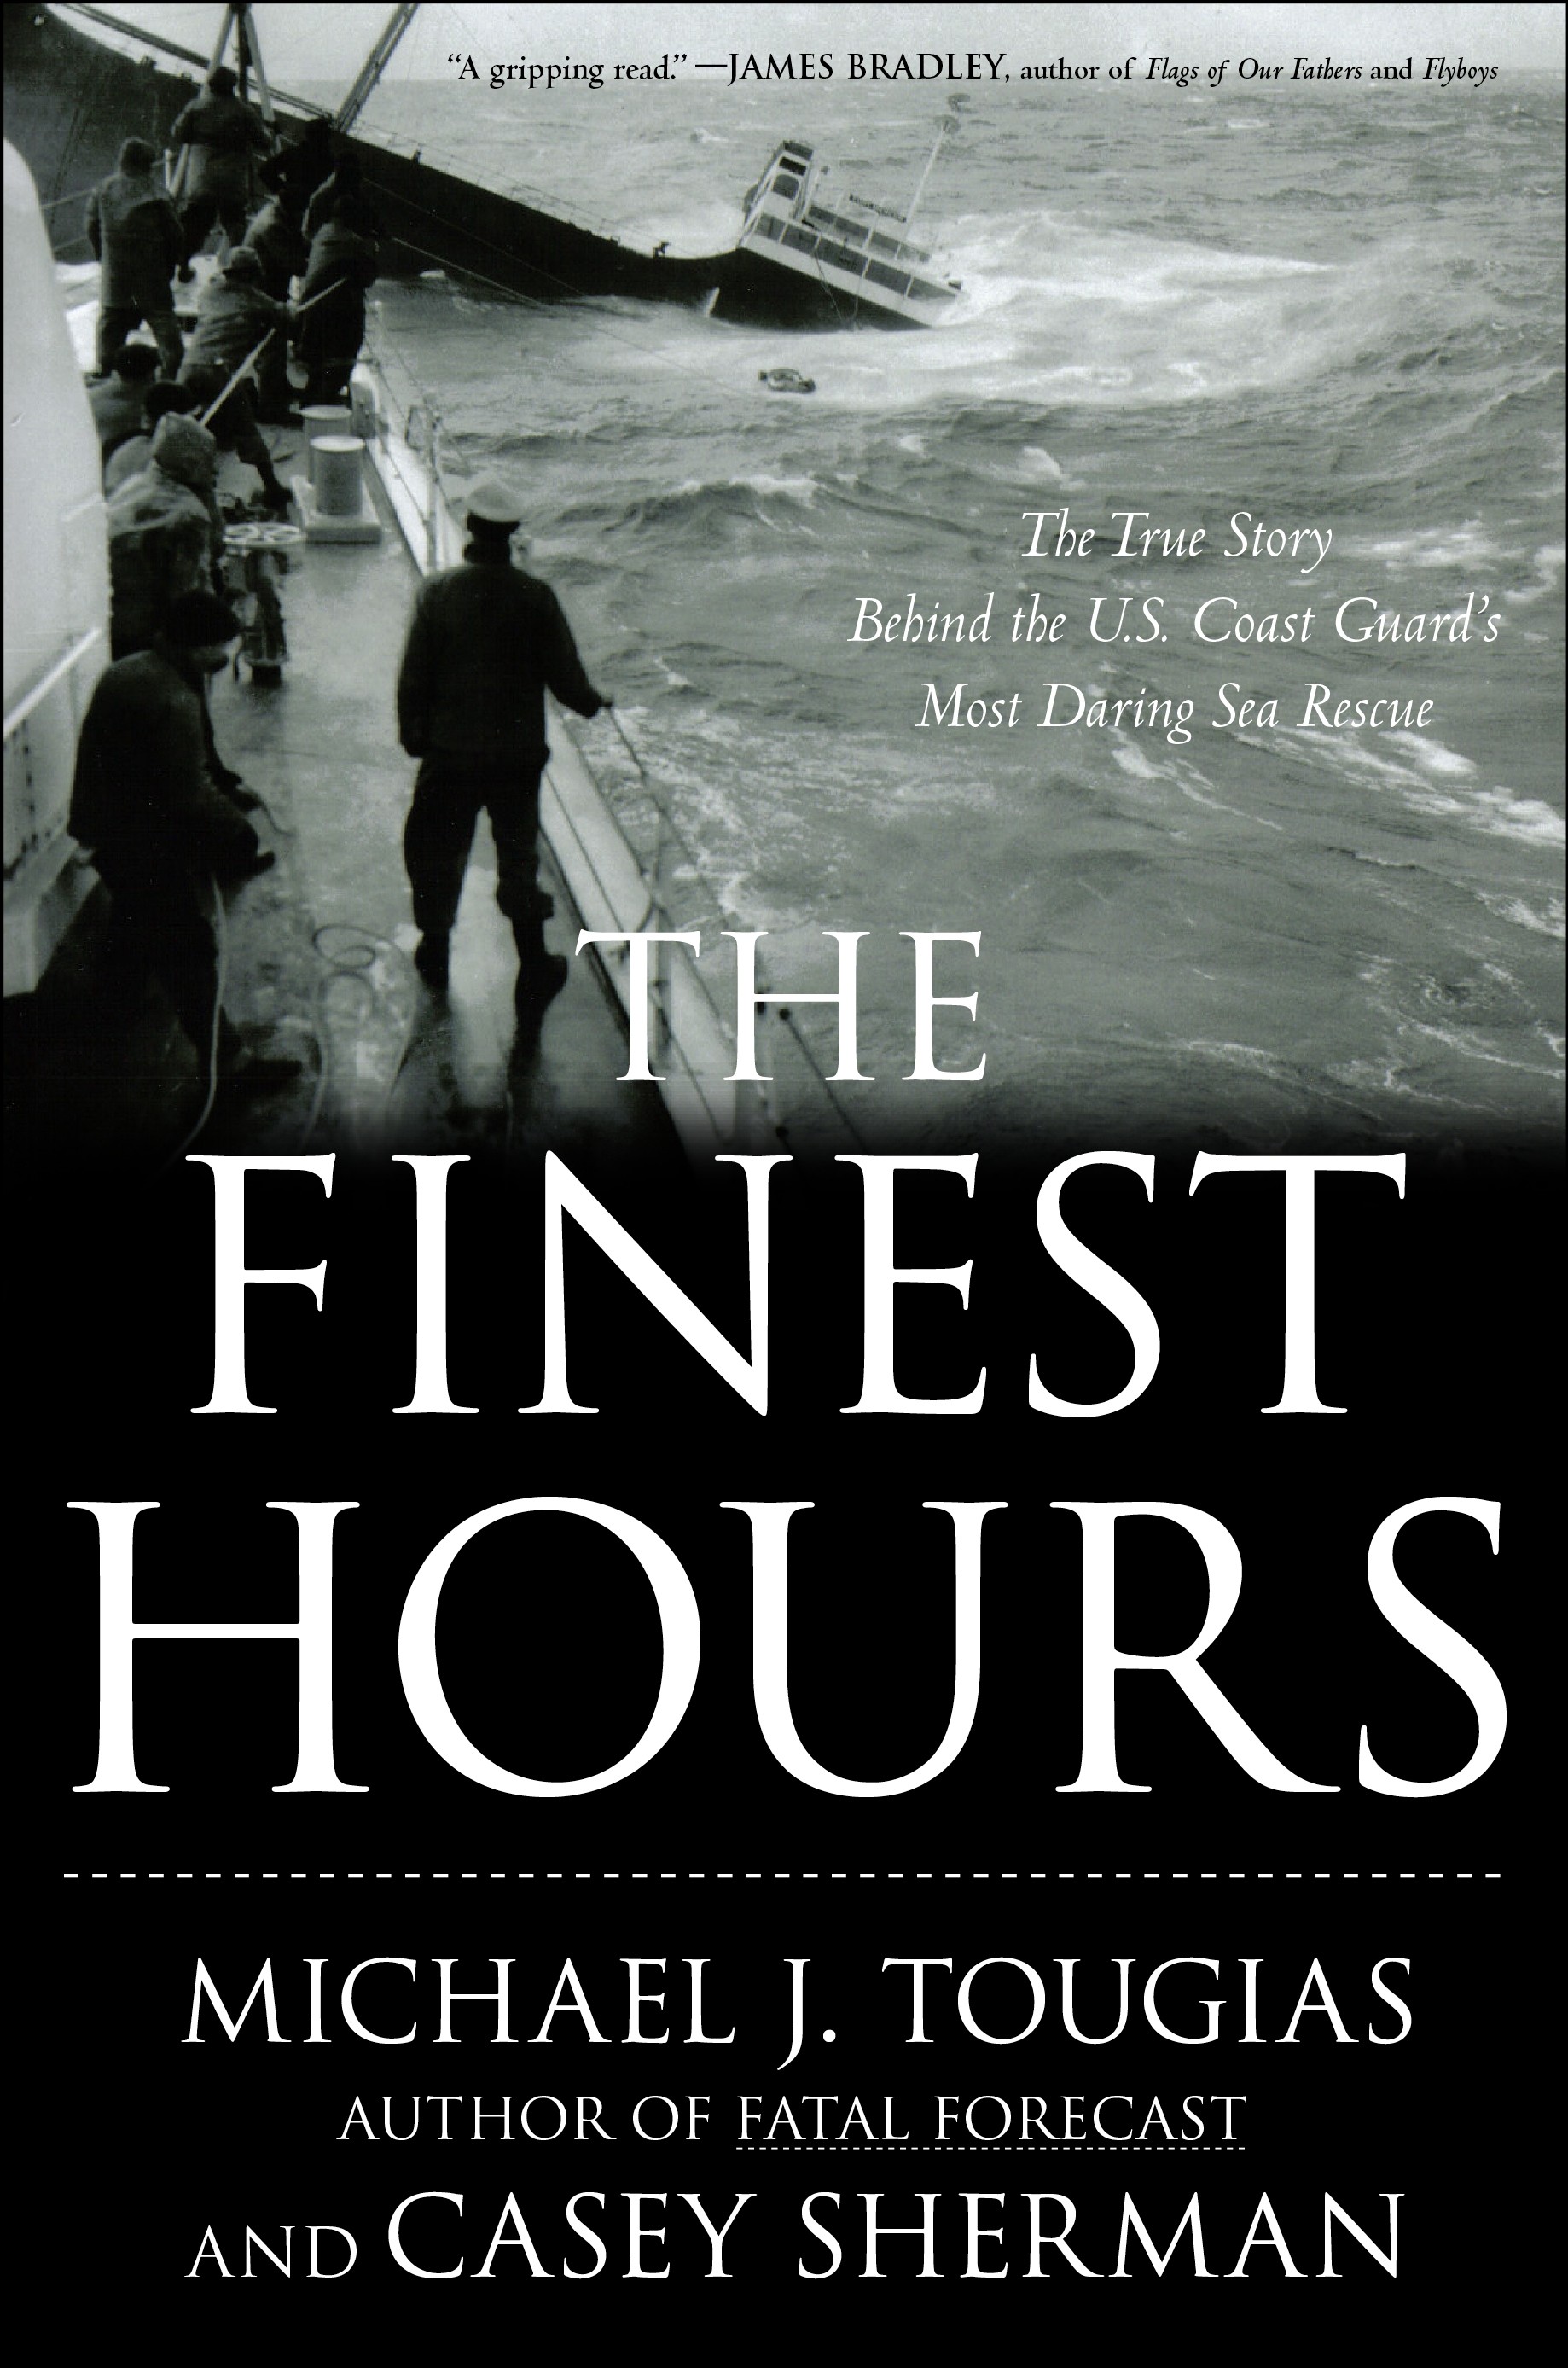 Image front cover of the book The Finest Hours